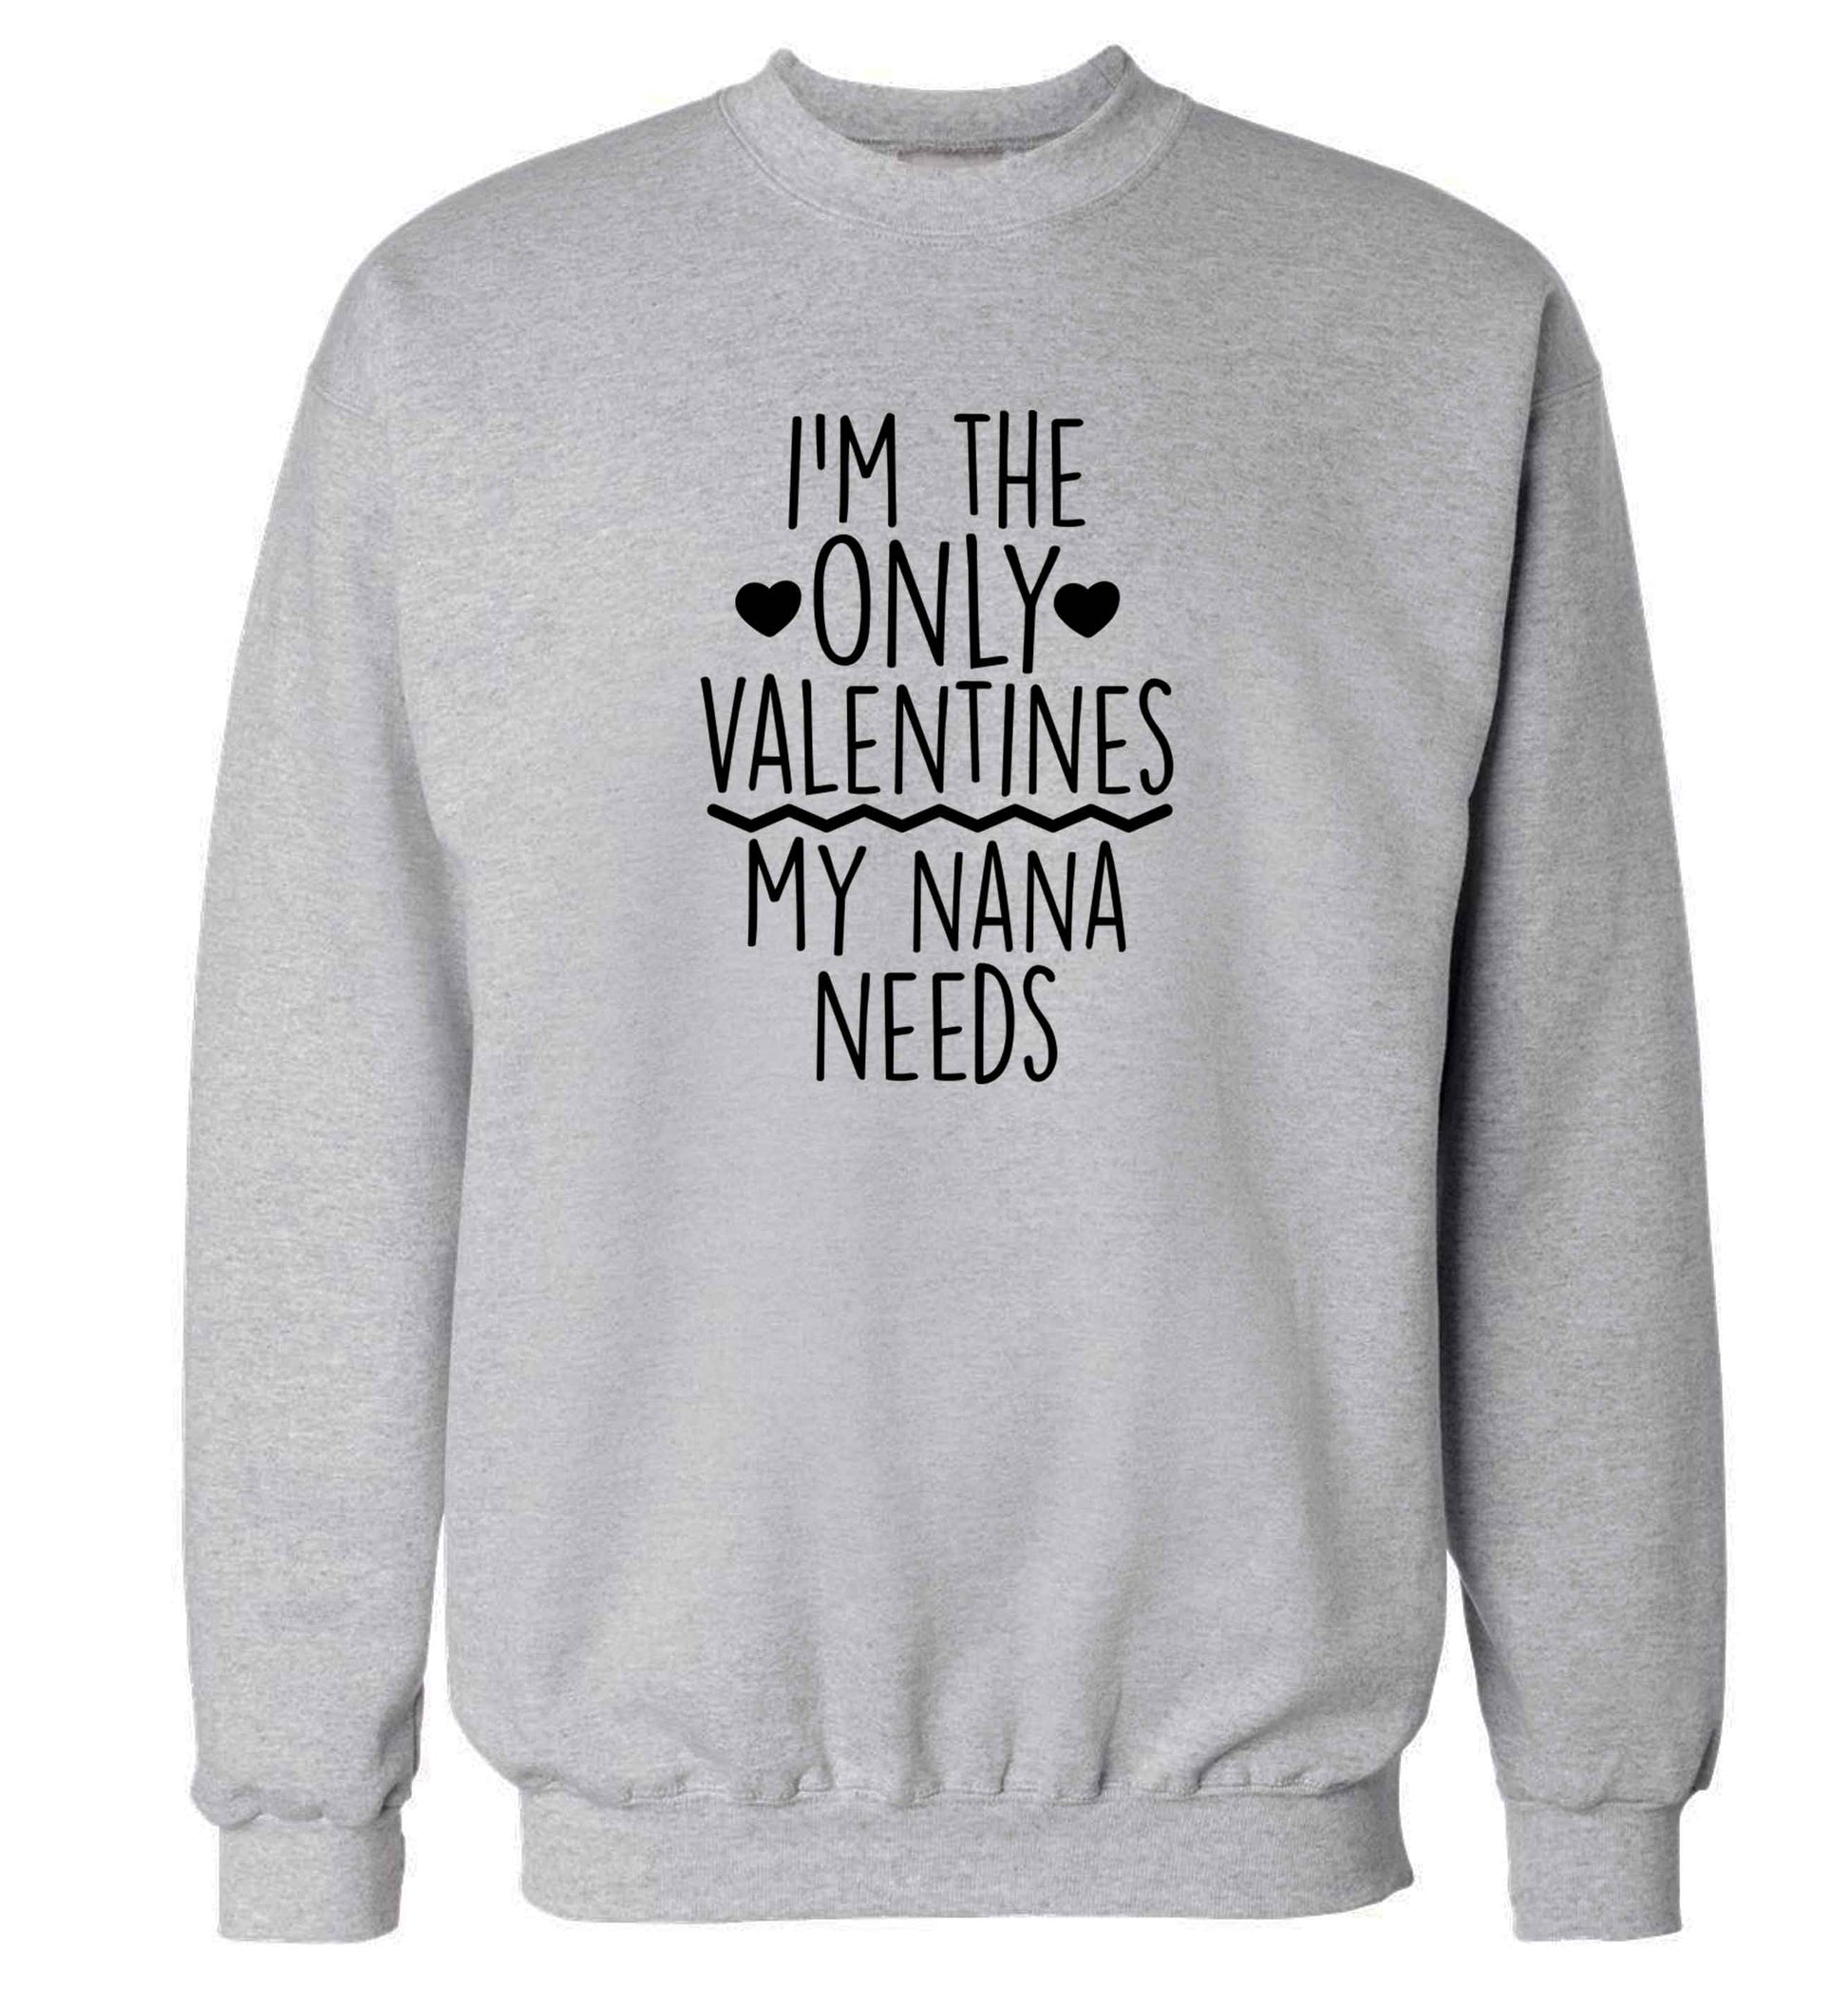 I'm the only valentines my nana needs adult's unisex grey sweater 2XL